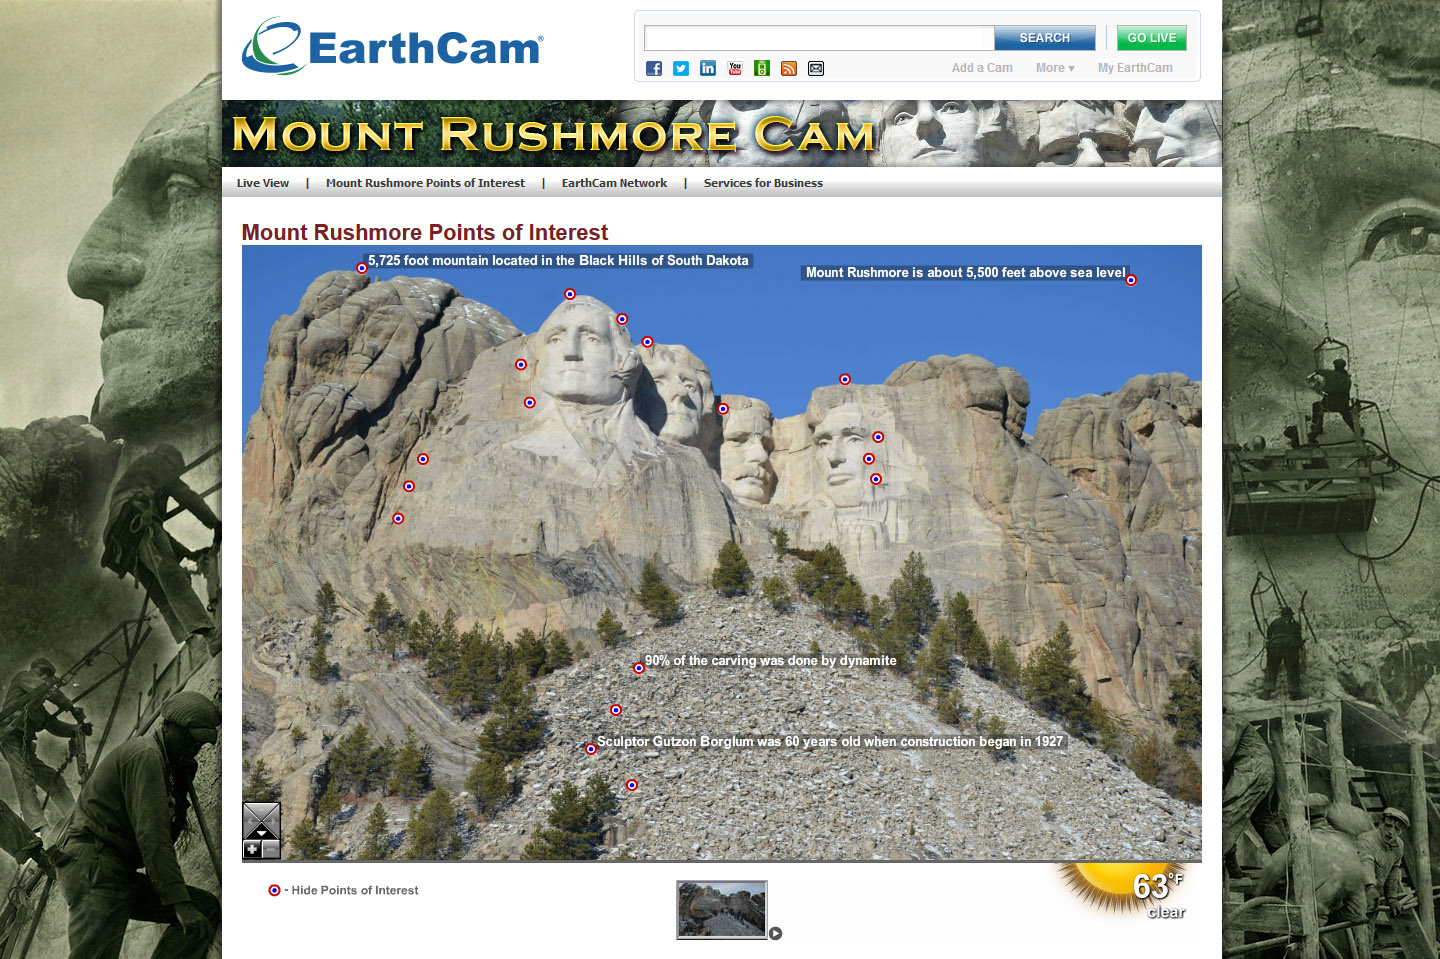 An interactive overlay presents interesting information and facts about the monument.